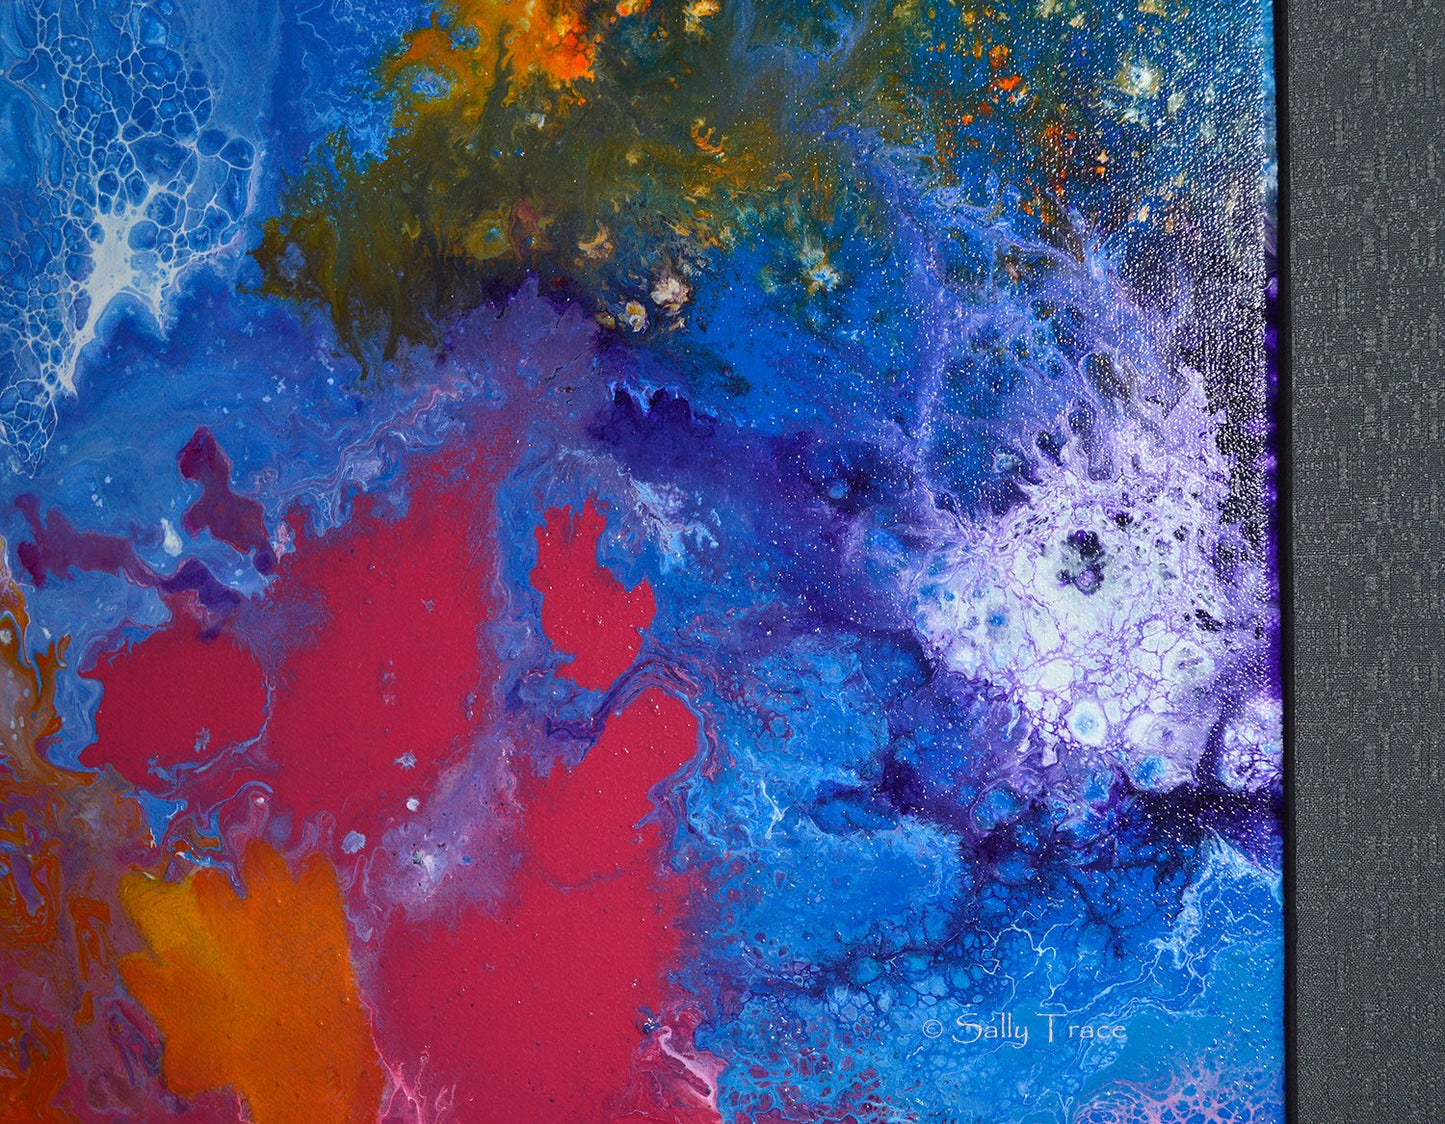 Playful Persuasion, original abstract fluid painting by Sally Trace